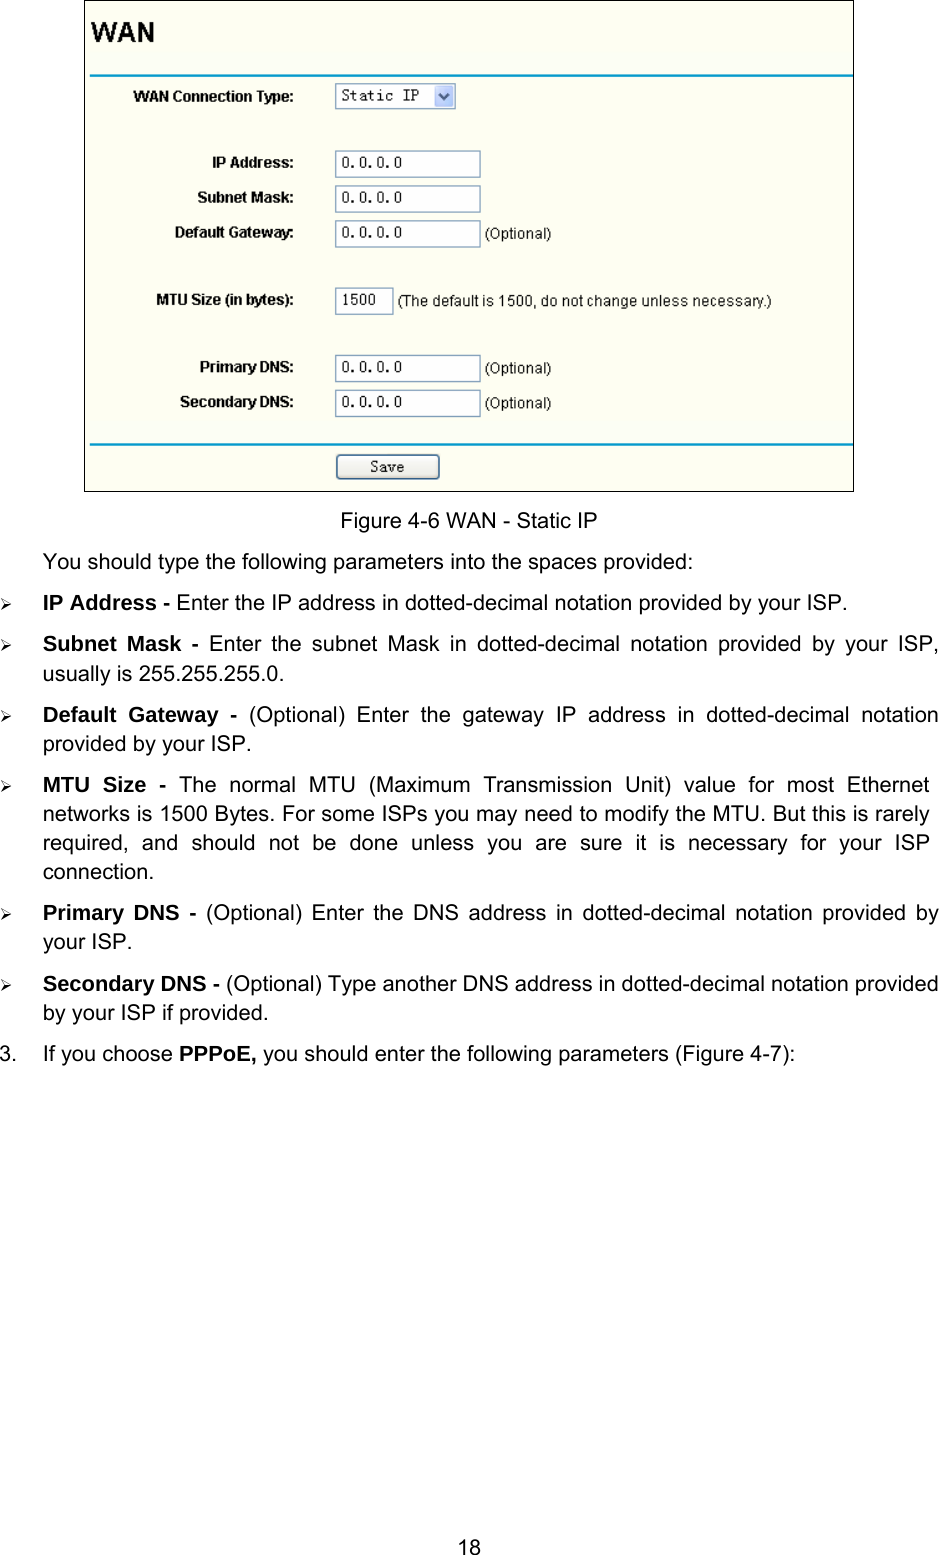  18  Figure 4-6 WAN - Static IP You should type the following parameters into the spaces provided: ¾ IP Address - Enter the IP address in dotted-decimal notation provided by your ISP. ¾ Subnet Mask - Enter the subnet Mask in dotted-decimal notation provided by your ISP, usually is 255.255.255.0. ¾ Default Gateway - (Optional) Enter the gateway IP address in dotted-decimal notation provided by your ISP. ¾ MTU Size - The normal MTU (Maximum Transmission Unit) value for most Ethernet networks is 1500 Bytes. For some ISPs you may need to modify the MTU. But this is rarely required, and should not be done unless you are sure it is necessary for your ISP connection. ¾ Primary DNS - (Optional) Enter the DNS address in dotted-decimal notation provided by your ISP. ¾ Secondary DNS - (Optional) Type another DNS address in dotted-decimal notation provided by your ISP if provided. 3.  If you choose PPPoE, you should enter the following parameters (Figure 4-7):   